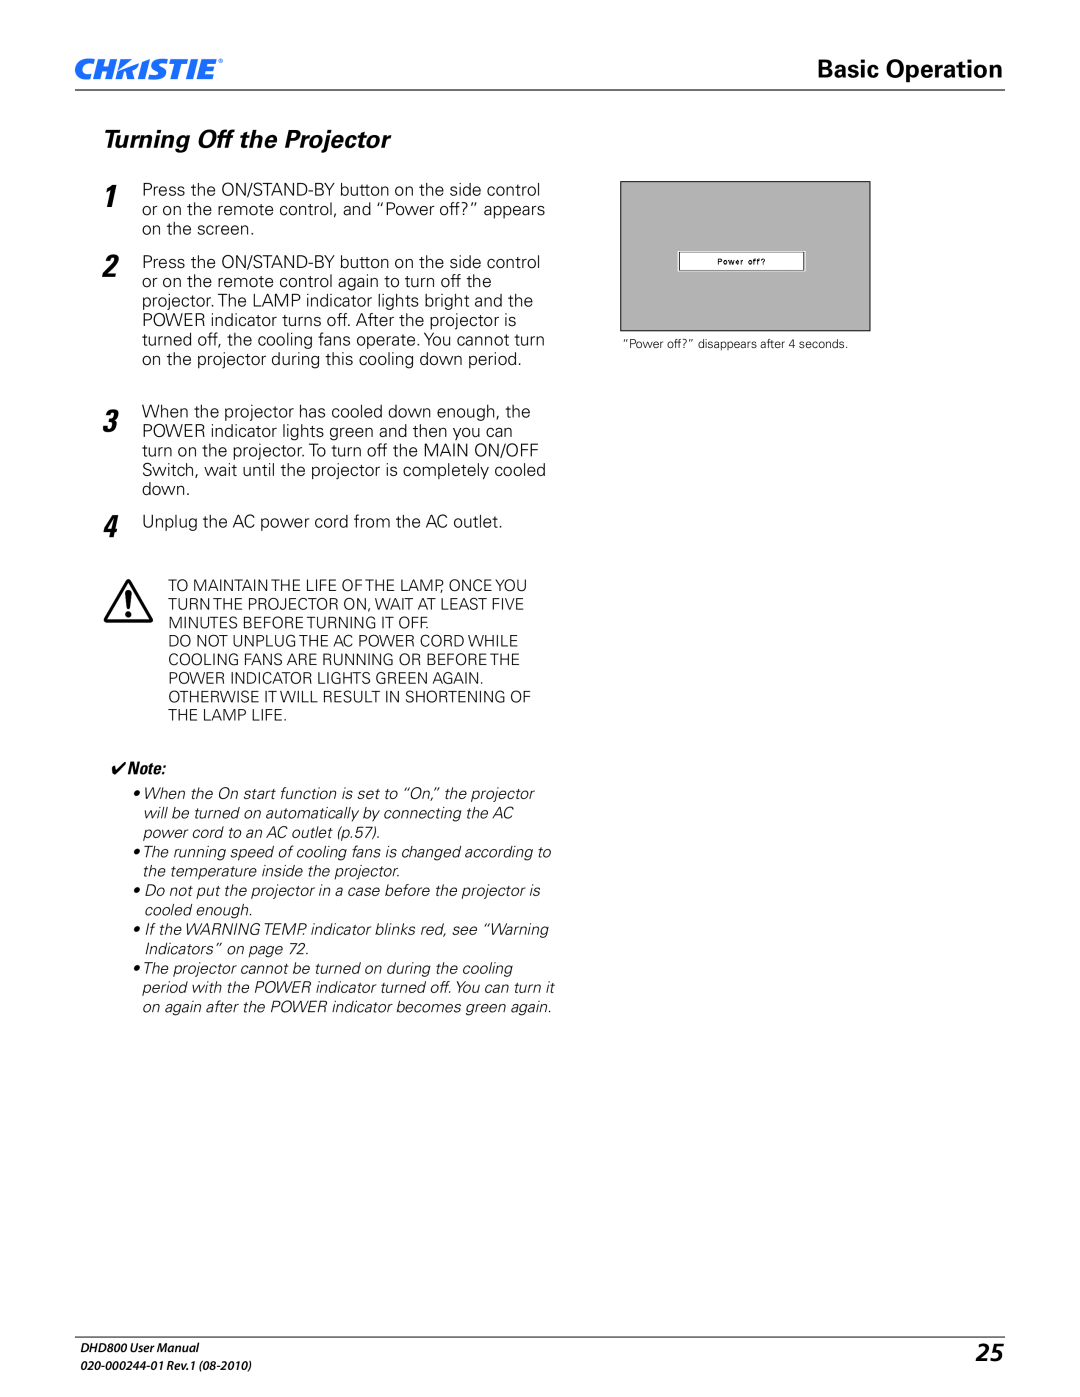 Christie Digital Systems DHD800 user manual Basic Operation, Turning Off the Projector 